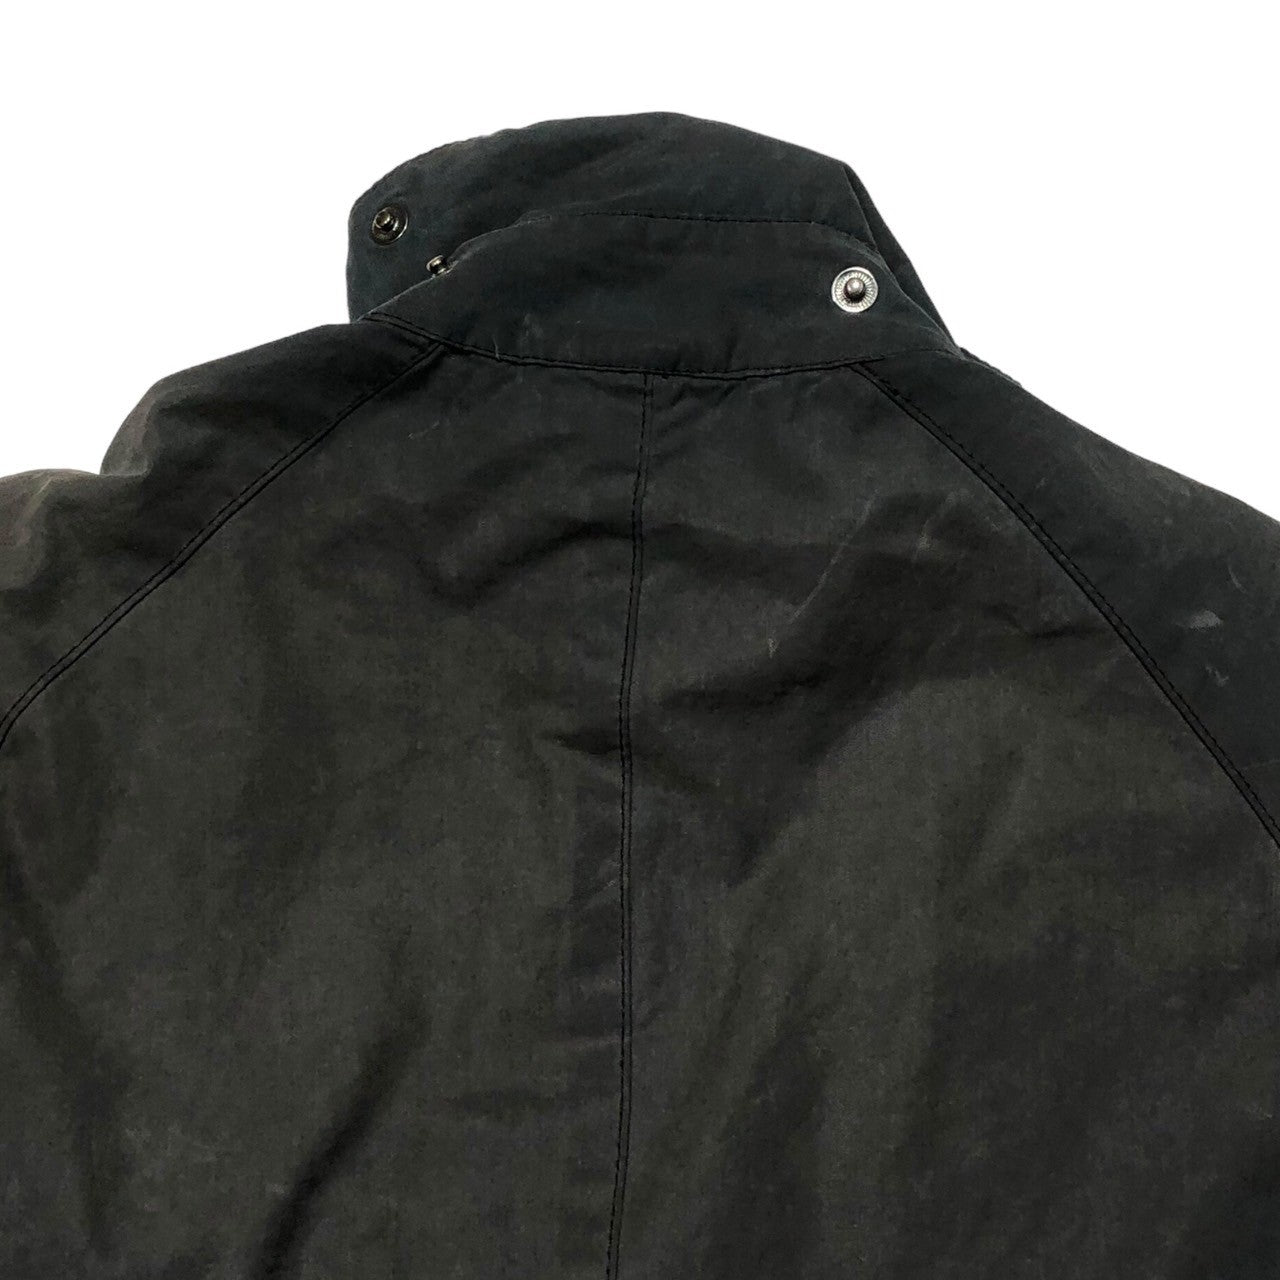 Barbour(バブアー) ASHBY WAX JACKET アシュビー オイルドジャケット  MWX0339NY92 SIZE S グレー 裏地 チェック